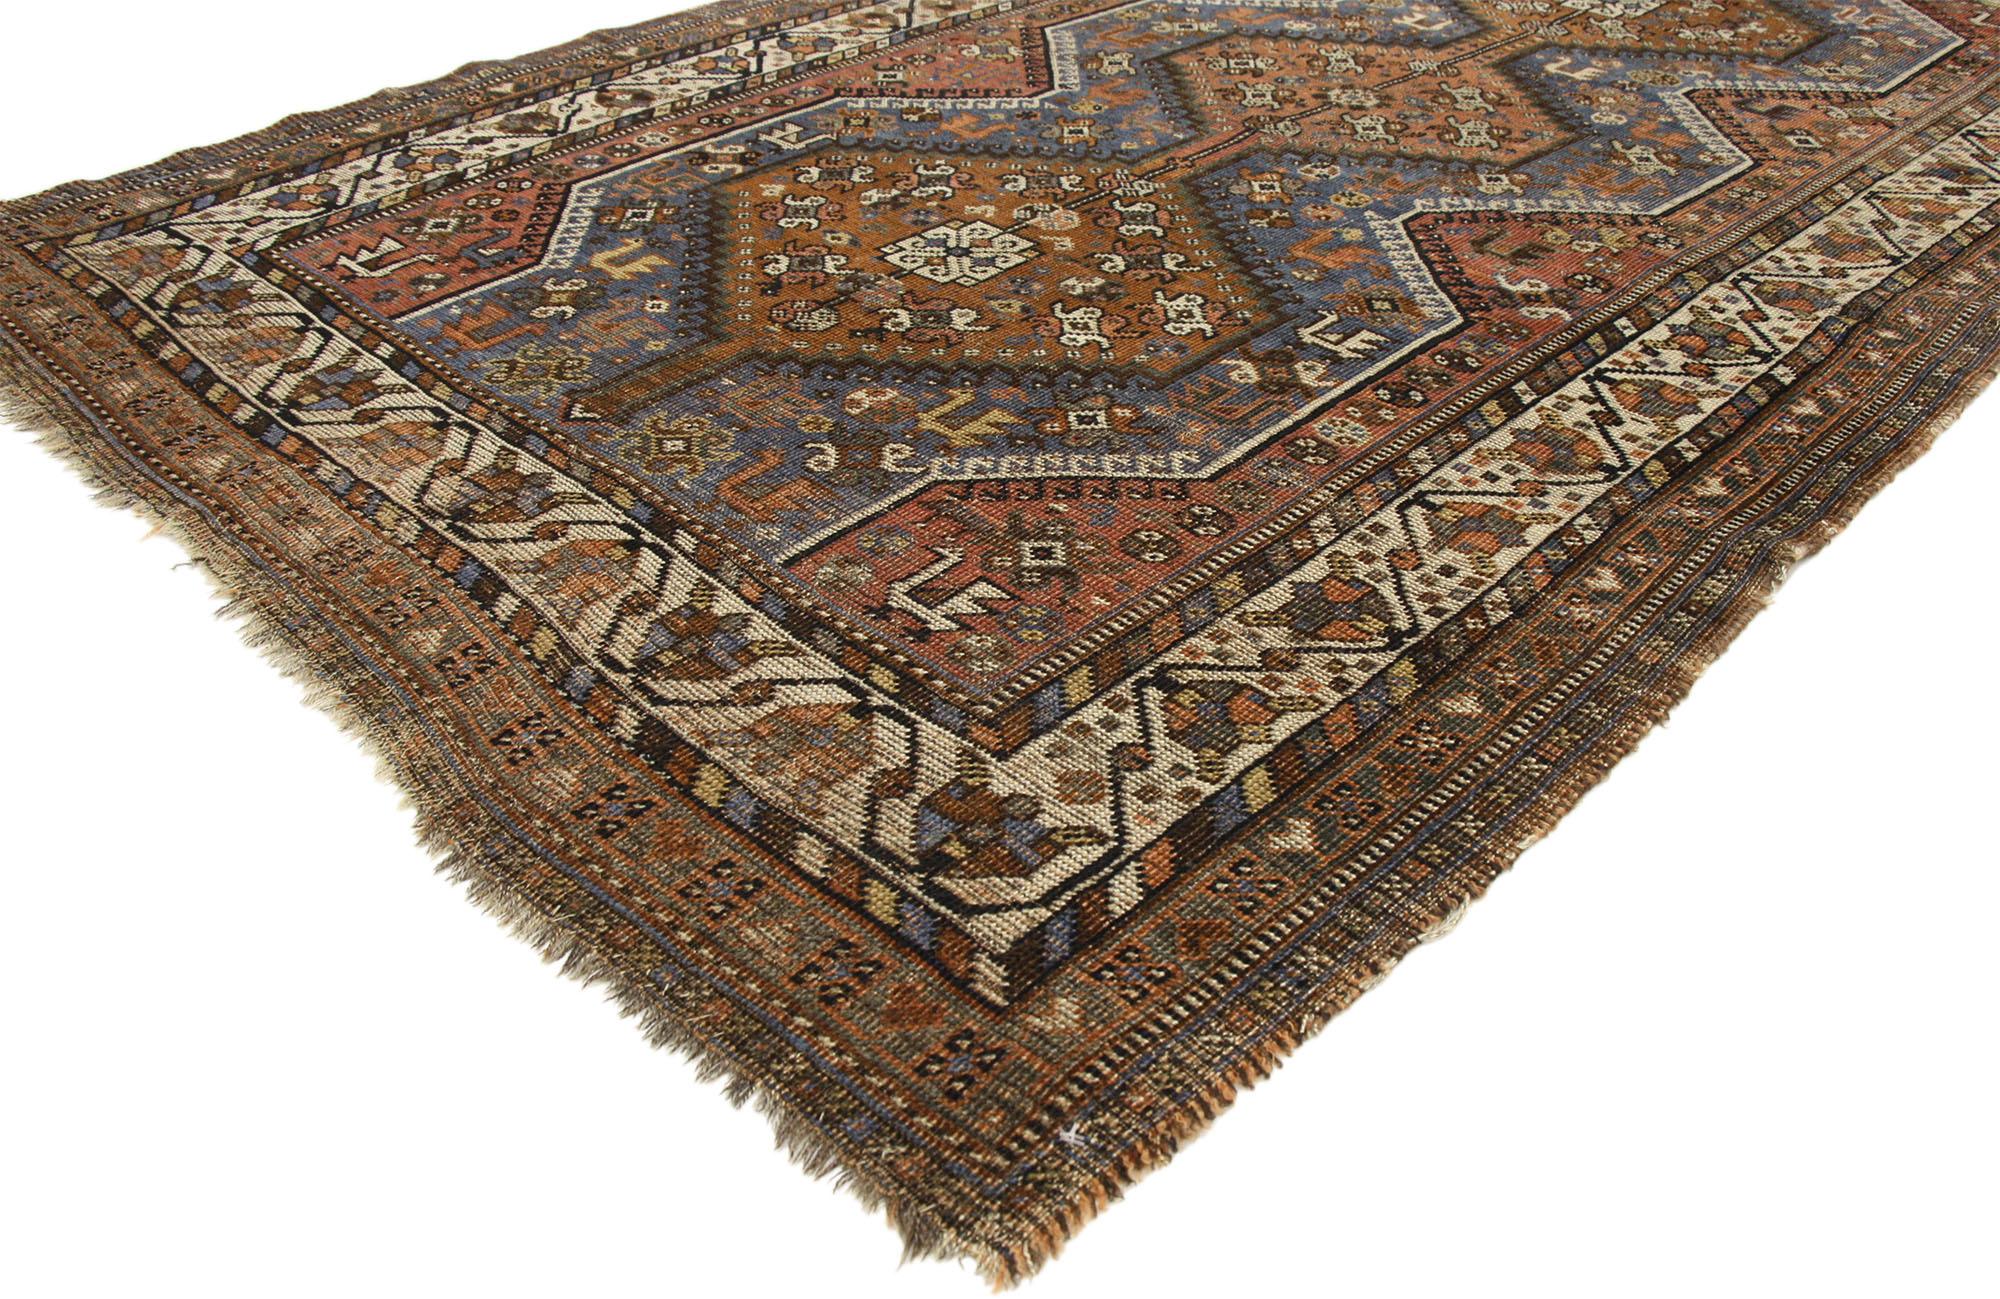 73298 Distressed Vintage Persian Shiraz Rug with Tribal Style 04'06 X 06'10.
Warm and inviting with rustic sensibility, this hand-knotted wool vintage Persian Shiraz rug beautifully embodies tribal style with nomadic charm. The weathered field